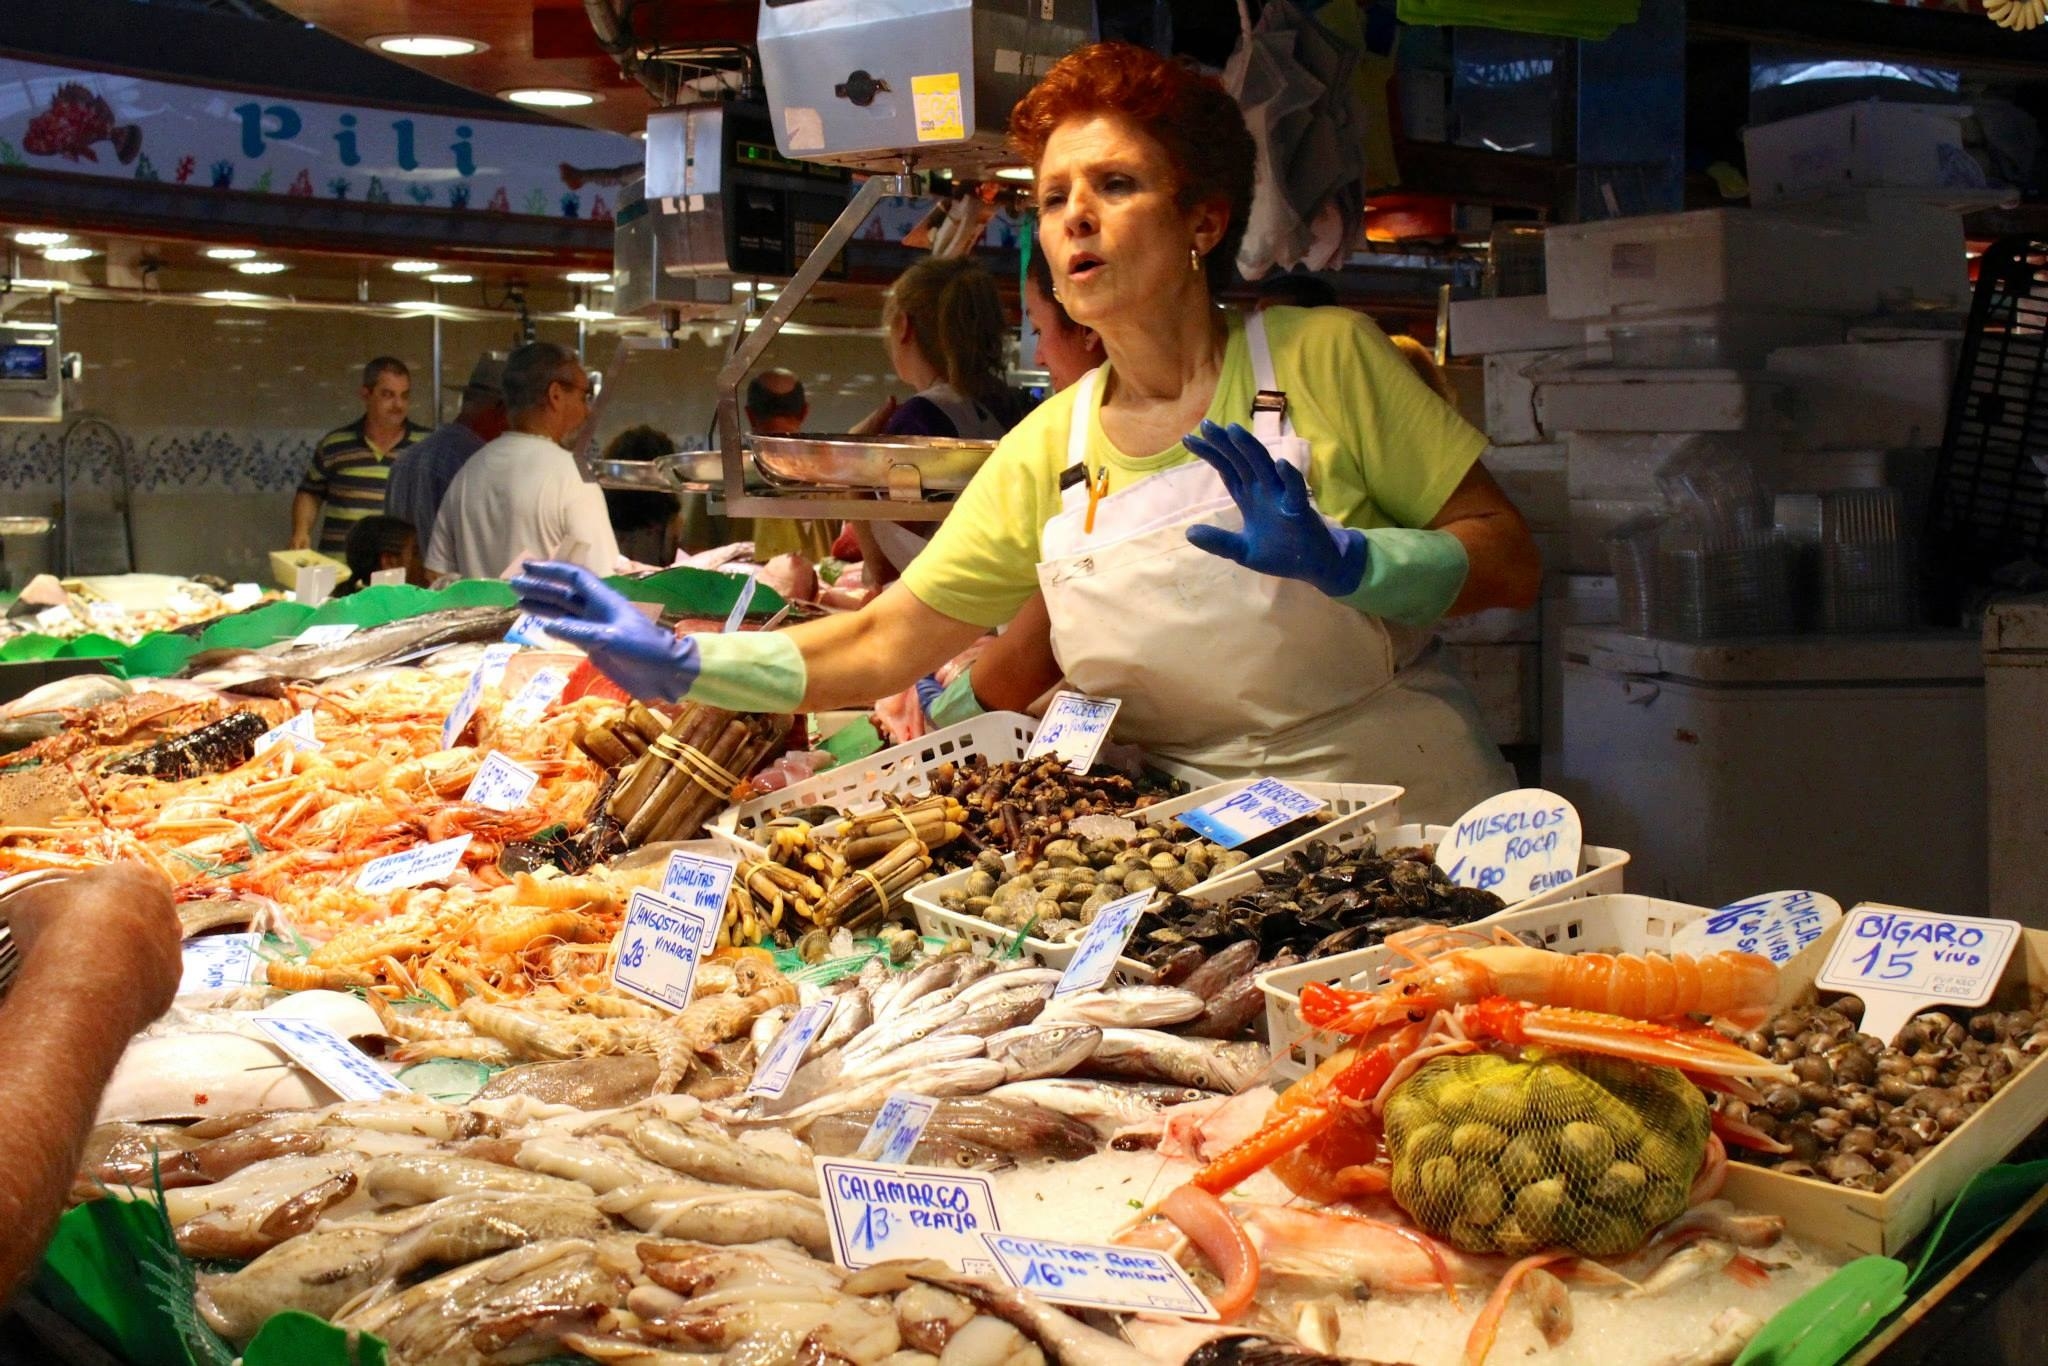 A woman at a seafood counter in a market.